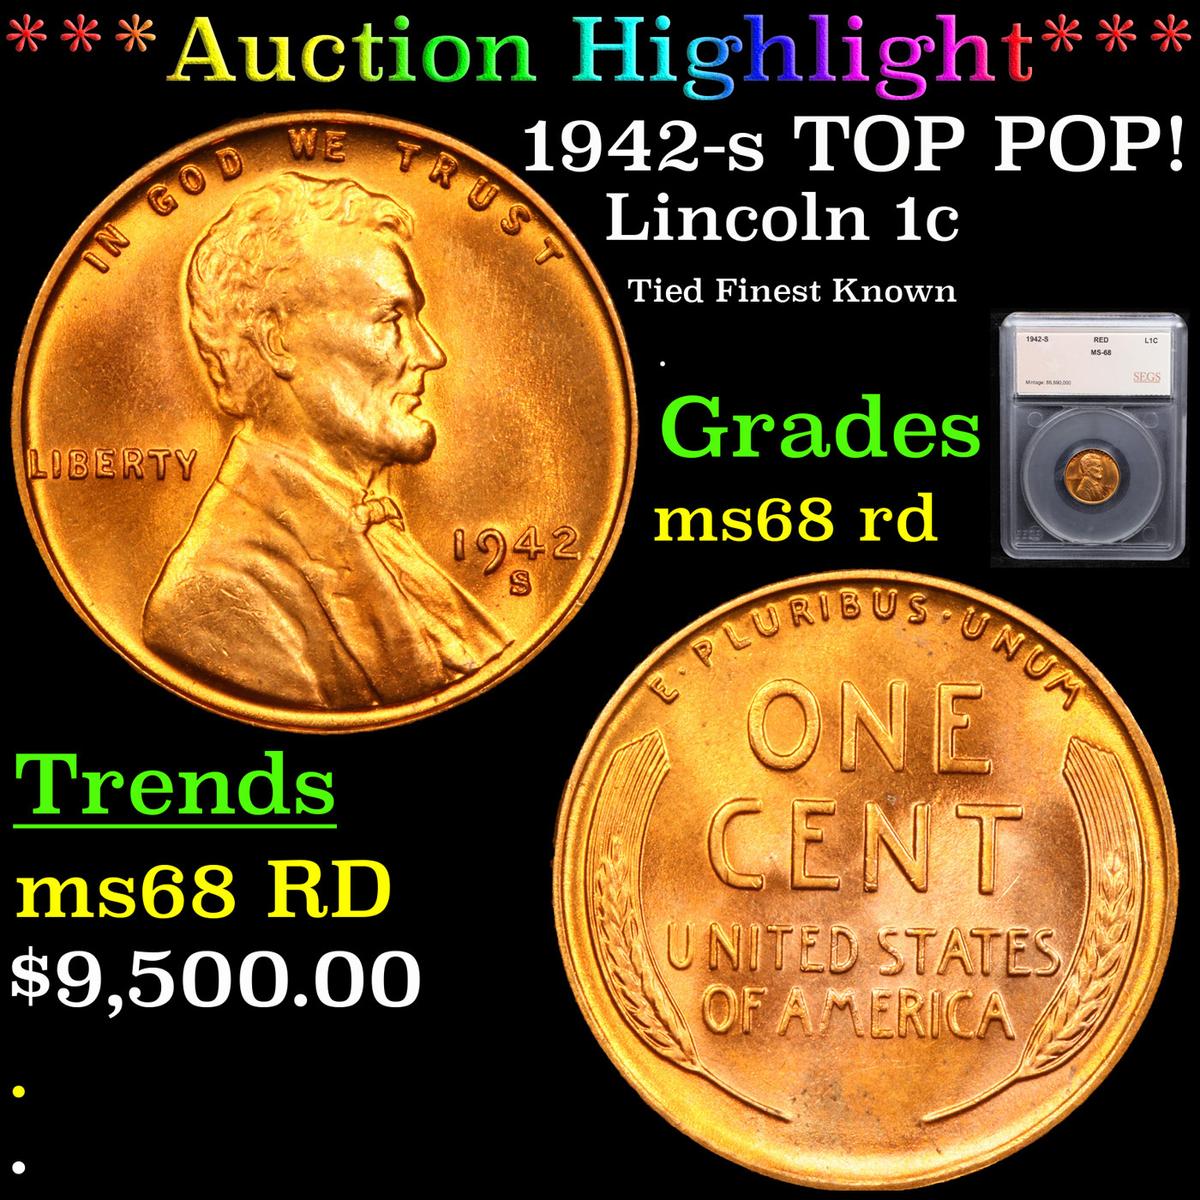 ***Auction Highlight*** 1942-s TOP POP! Lincoln Cent 1c Graded ms68 rd By SEGS (fc)